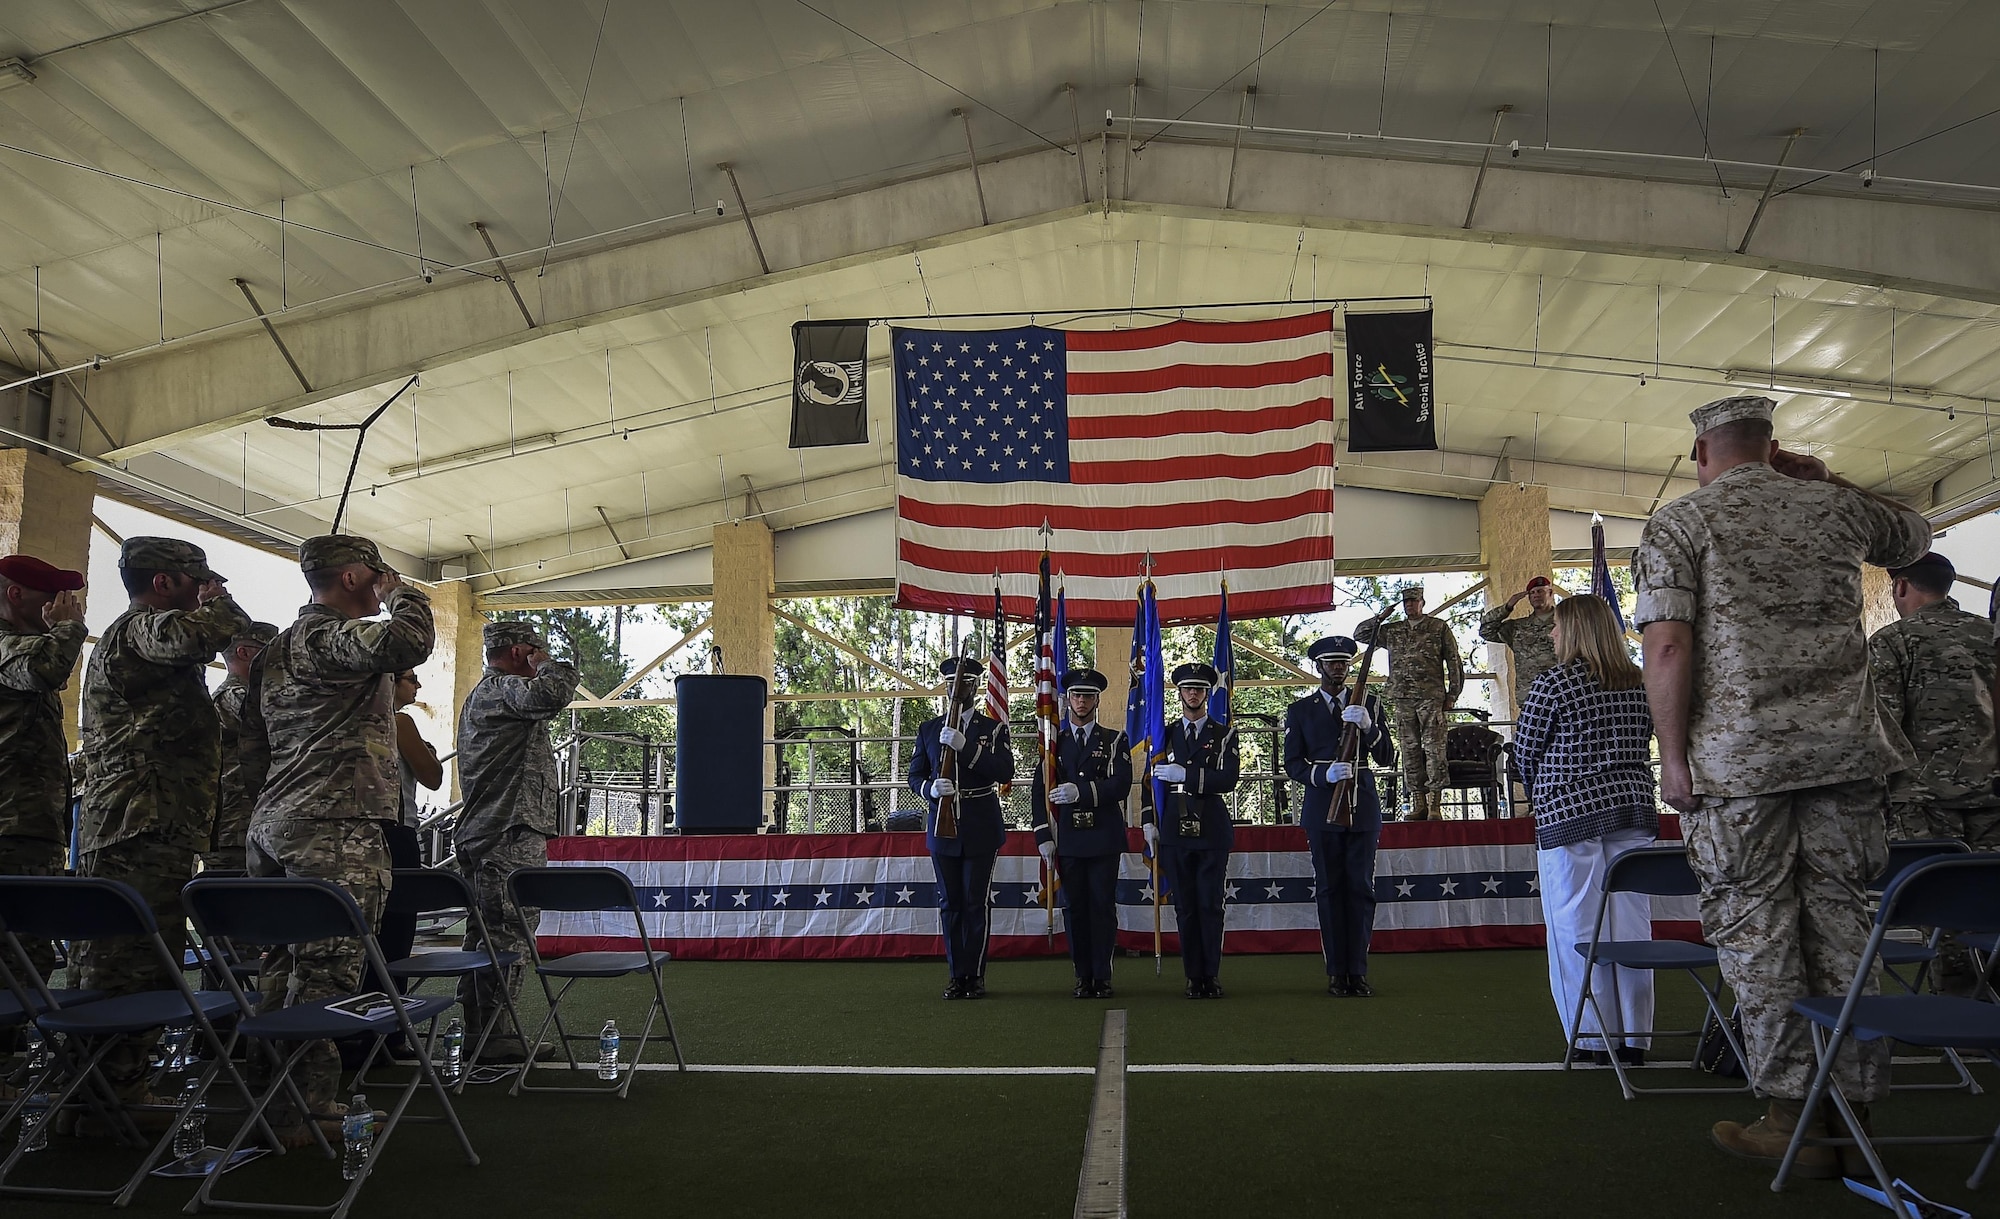 The Hurlburt Field Honor Guard present the colors during the 24th Special Operations Wing assumption of command at Hurlburt Field, Fla., July 14, 2016. Heithold presided over the assumption of command, where Martin took command of the sole Special Tactics wing in the Air Force. (U.S. Air Force photo by Senior Airman Ryan Conroy) 